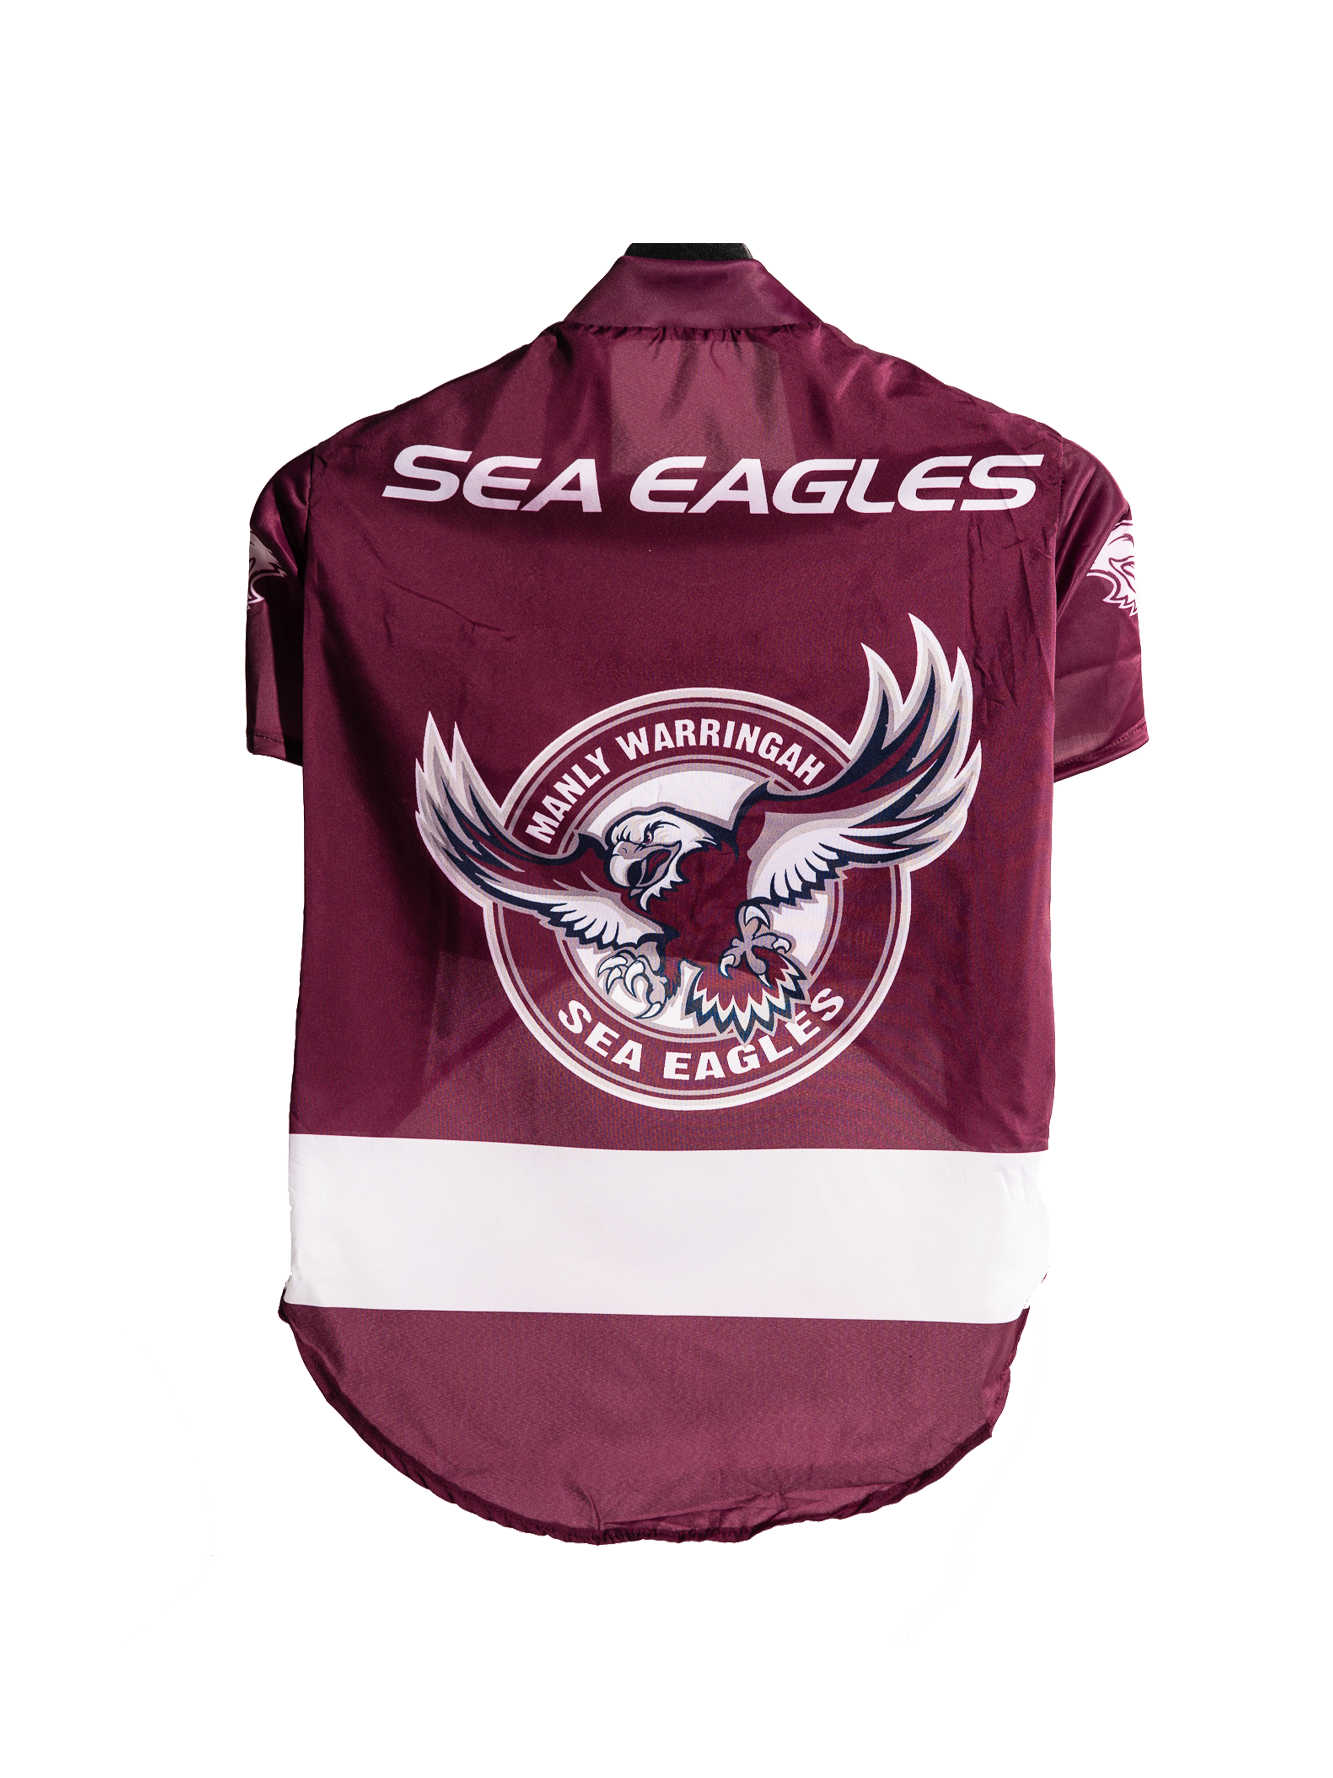 Manly Sea Eagles NRL Dog Jersey XS-XL